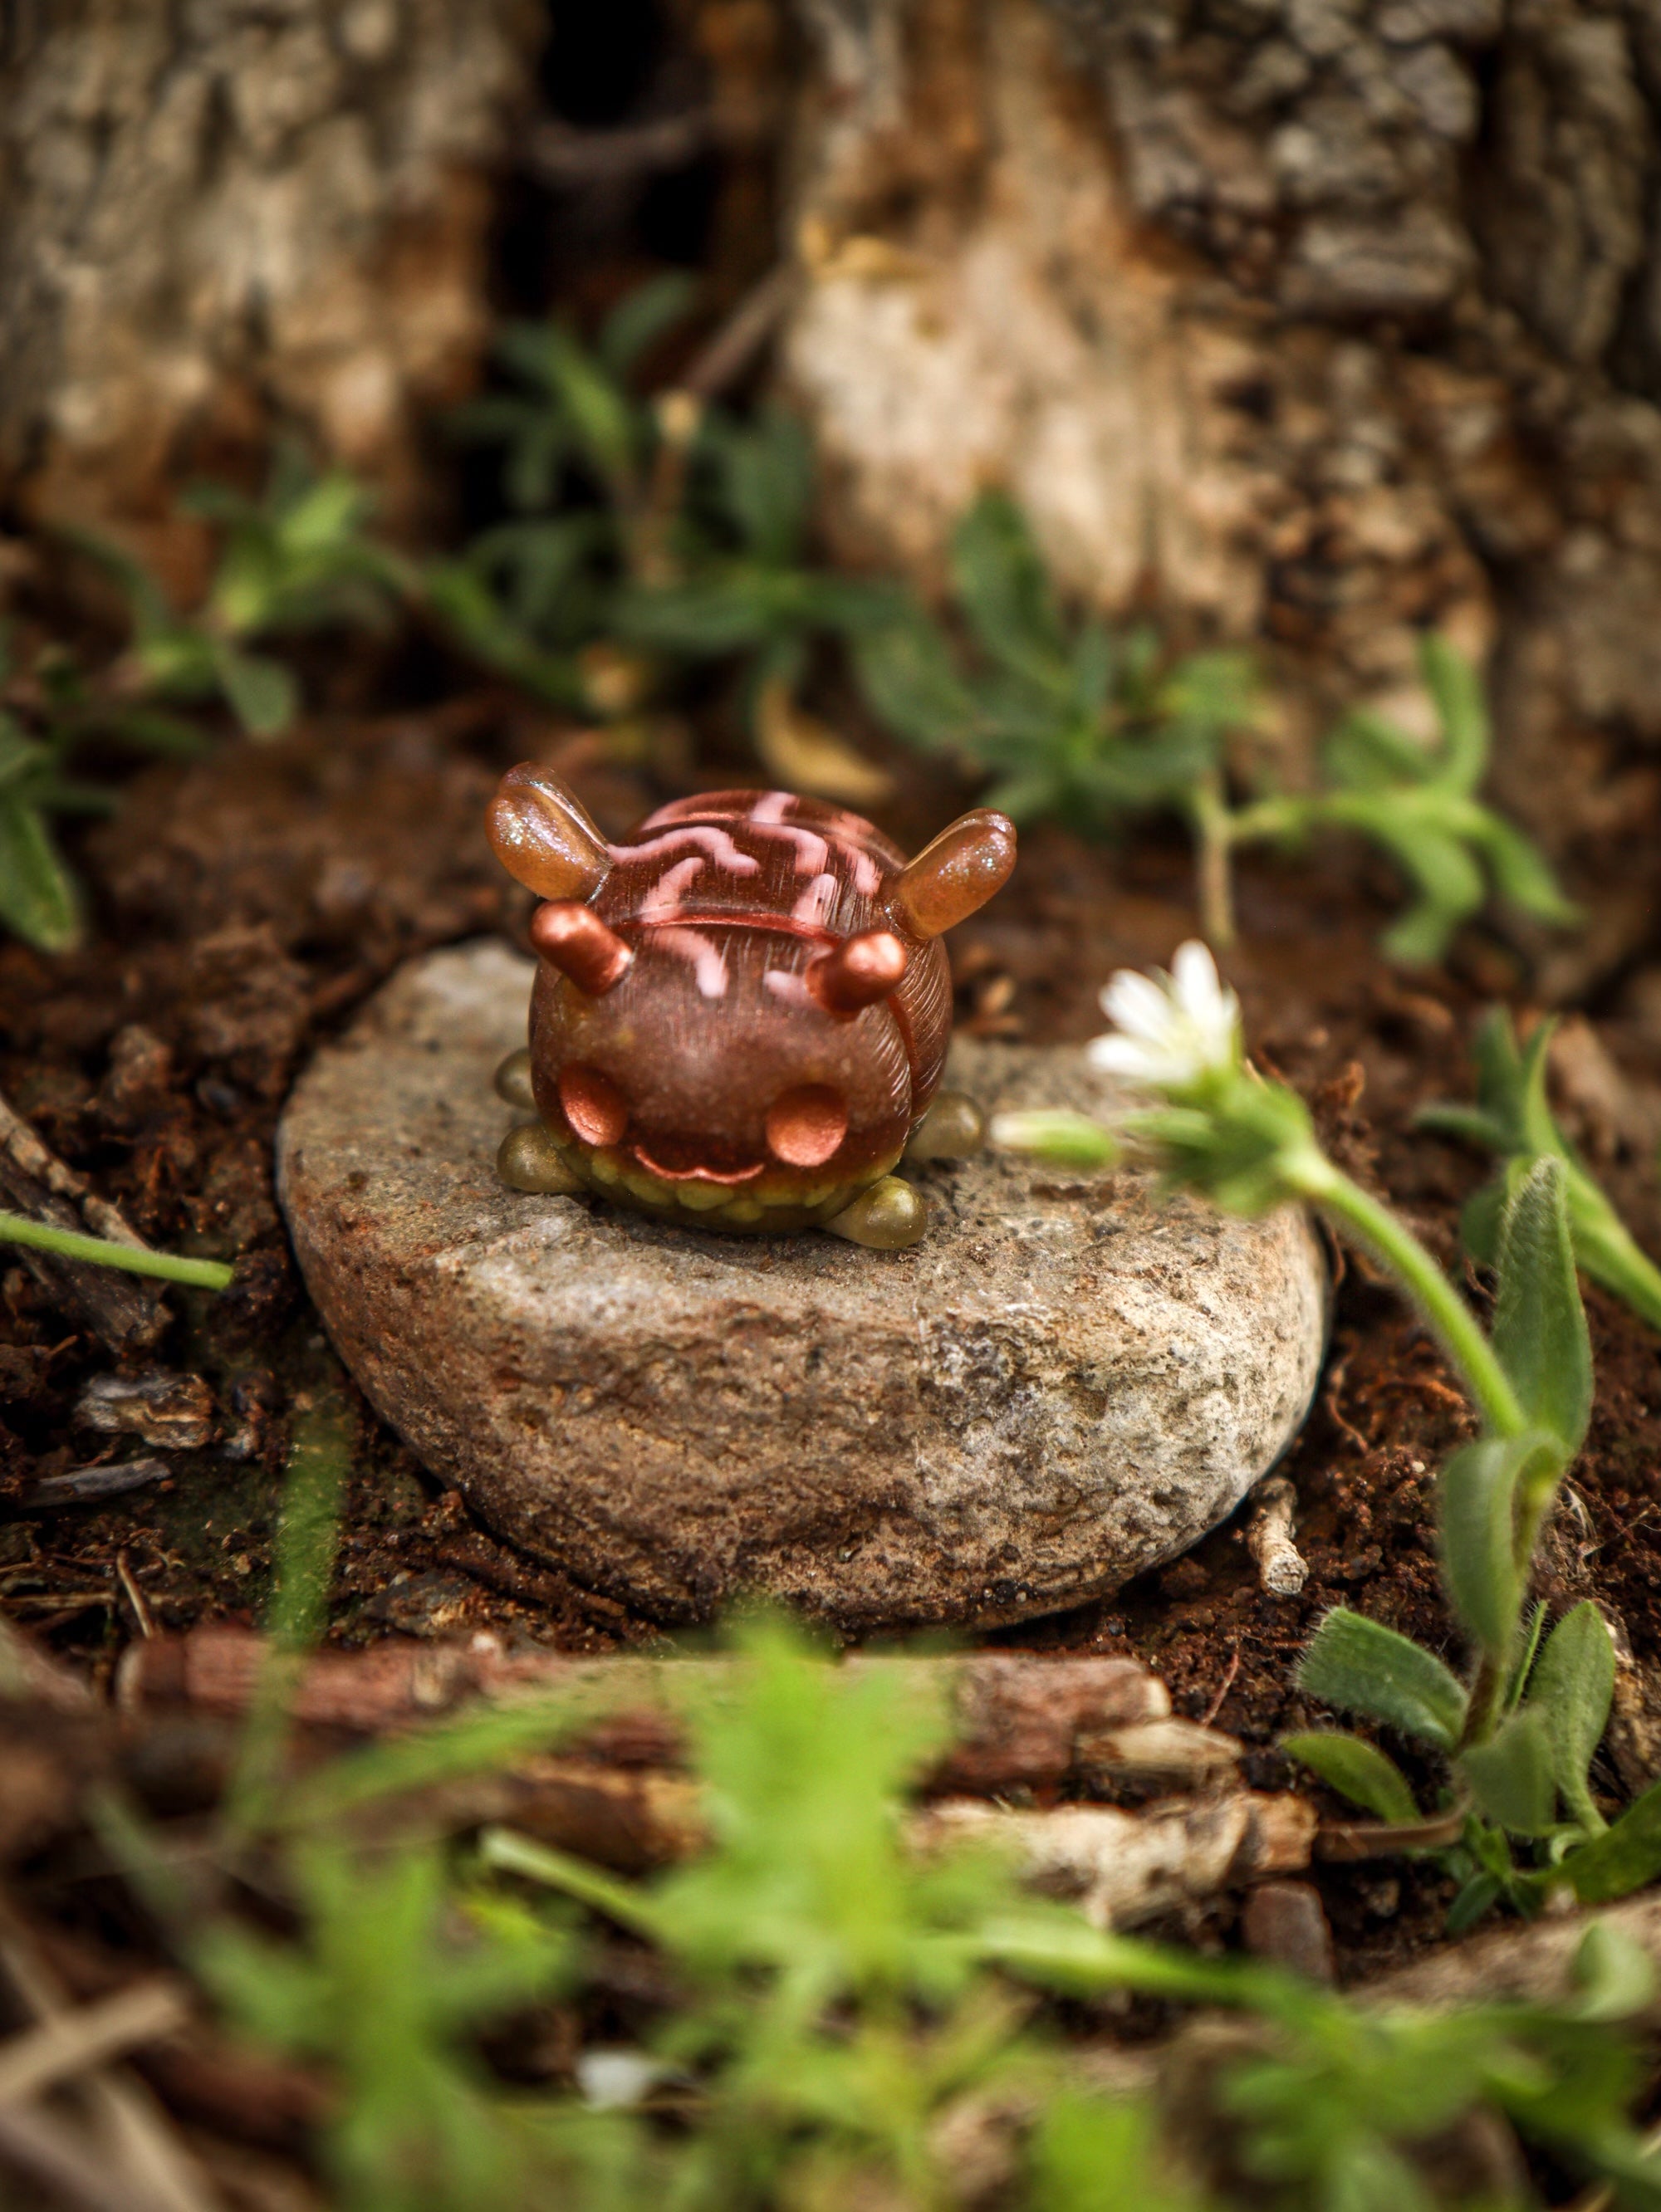 A small toy bug on a rock, part of the Octopus Cube collection by Fairies And Fancies at Strangecat Toys. Made of Polymer Clay and Resin, approximately 1 1/2 inches tall.